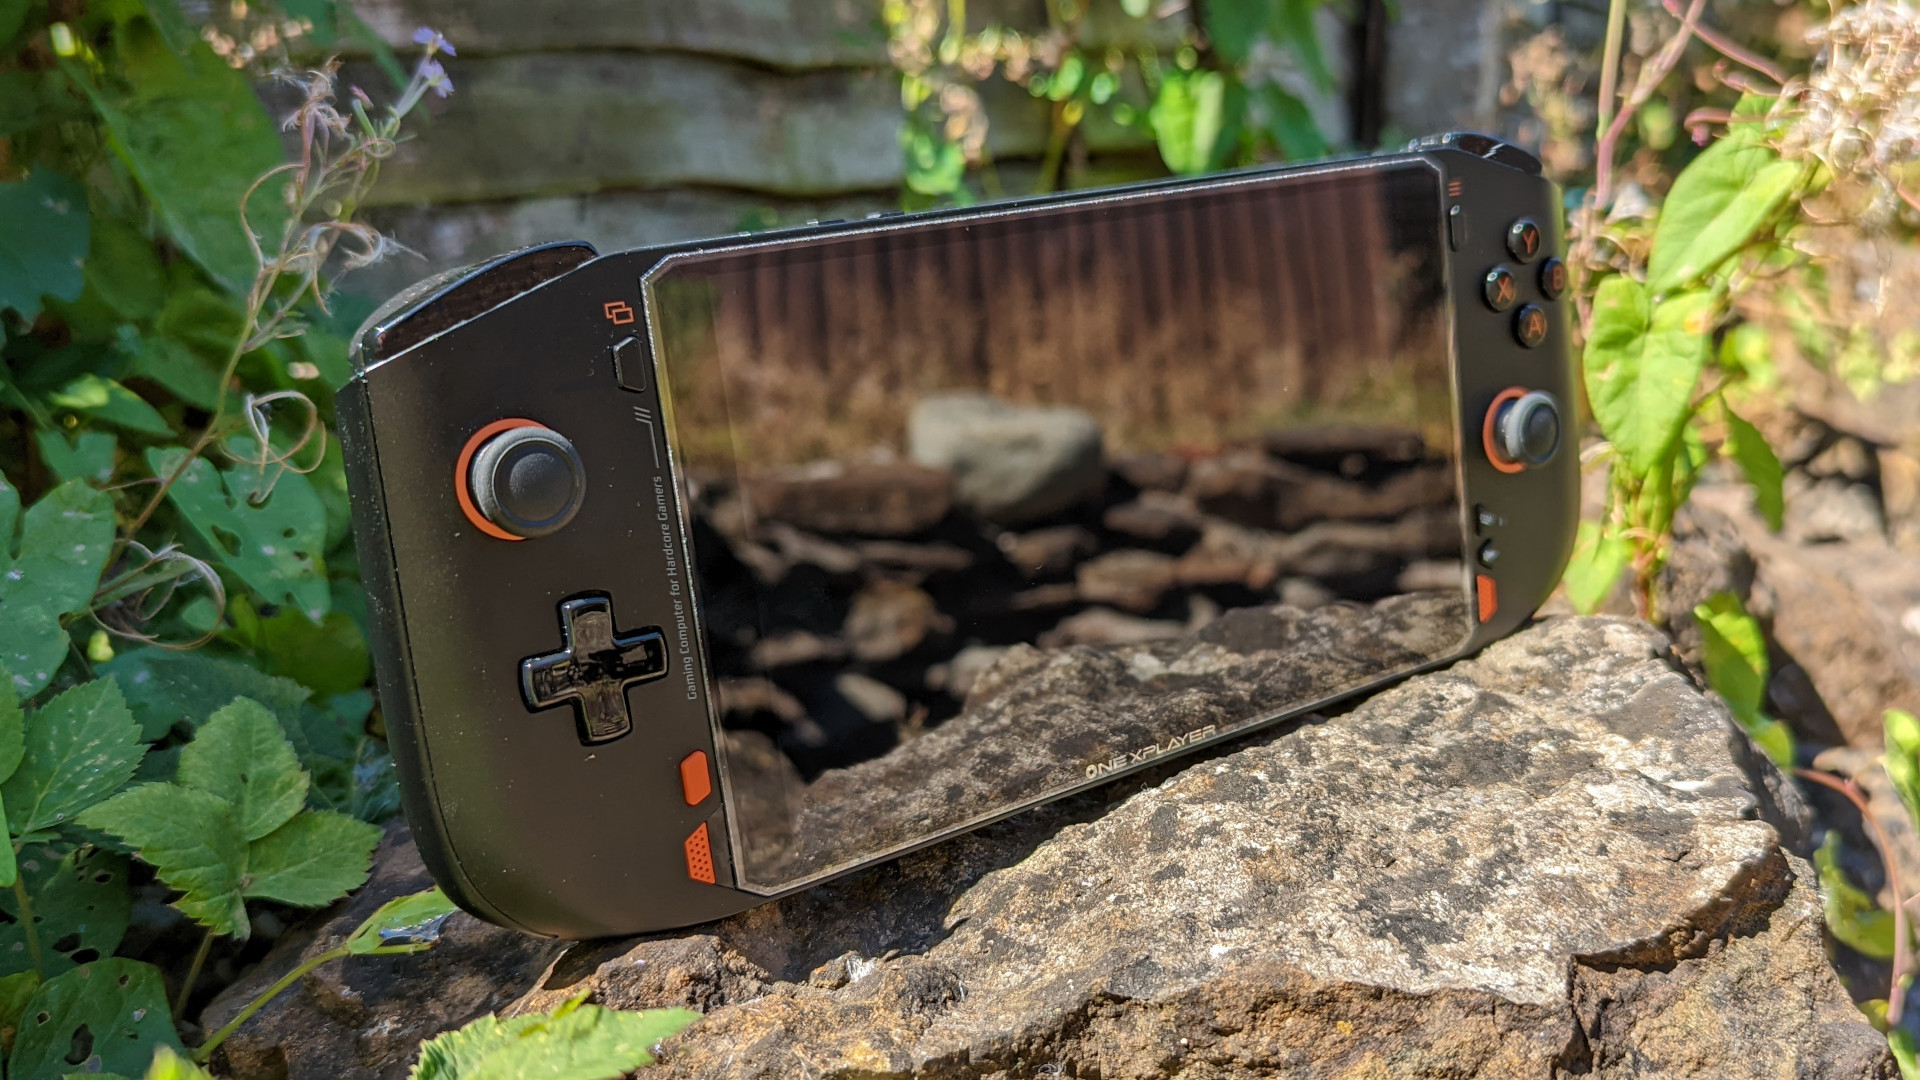 OneXPlayer Mini AMD review: the pocket rocket PC sits atop a rock, surrounded by green flora